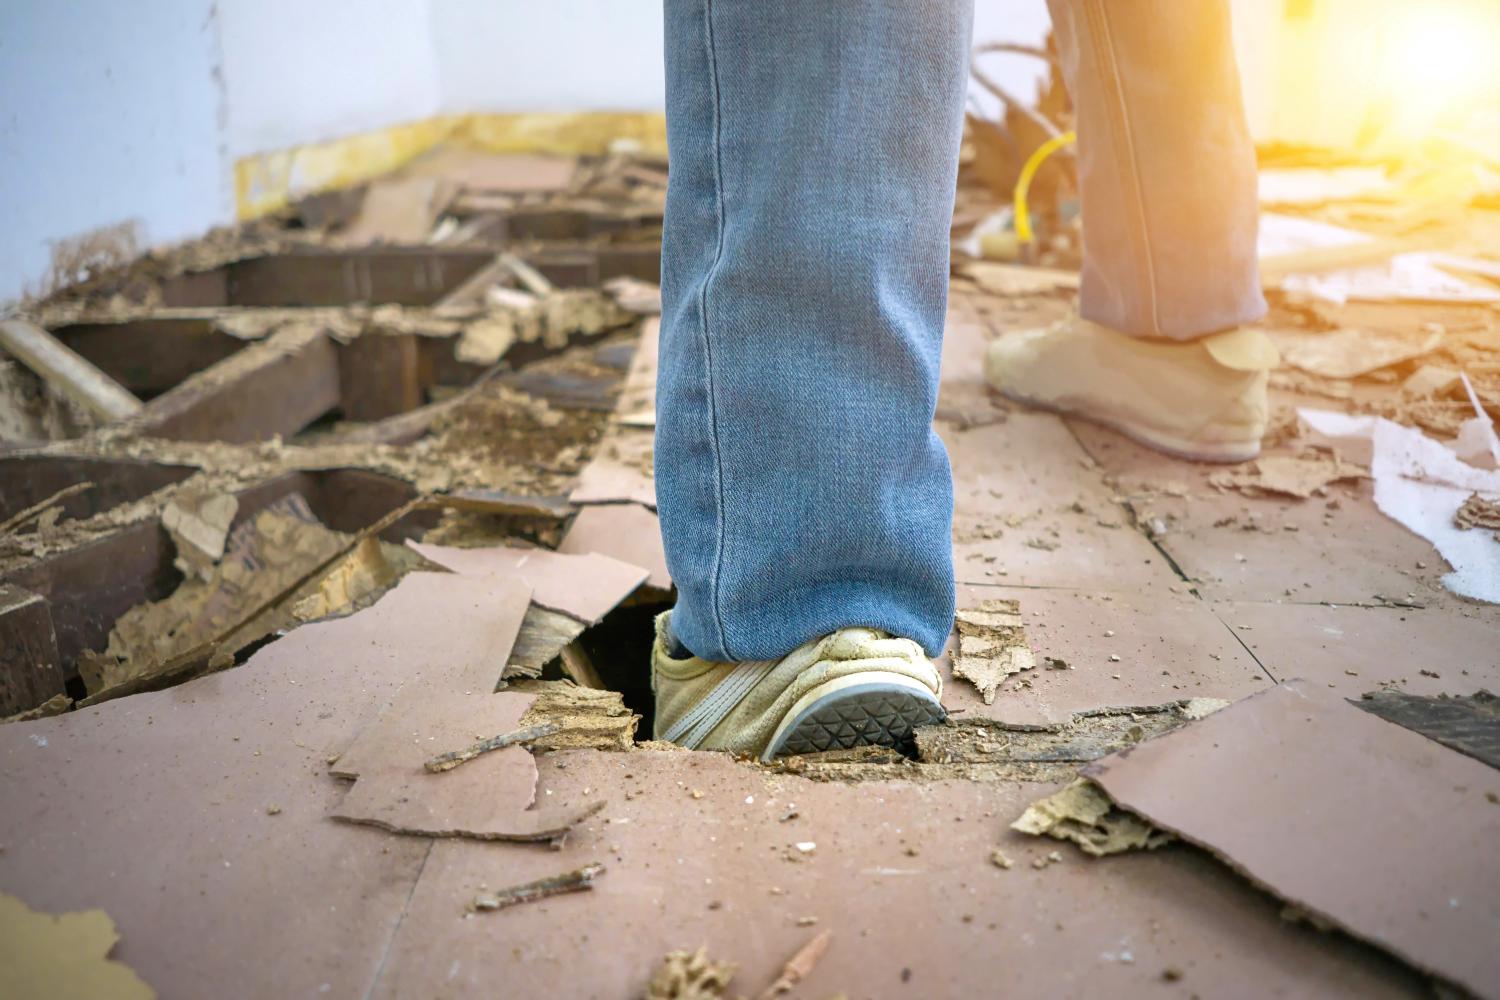 54-year-old woman receives $40,000 after falling through flooring of rental property